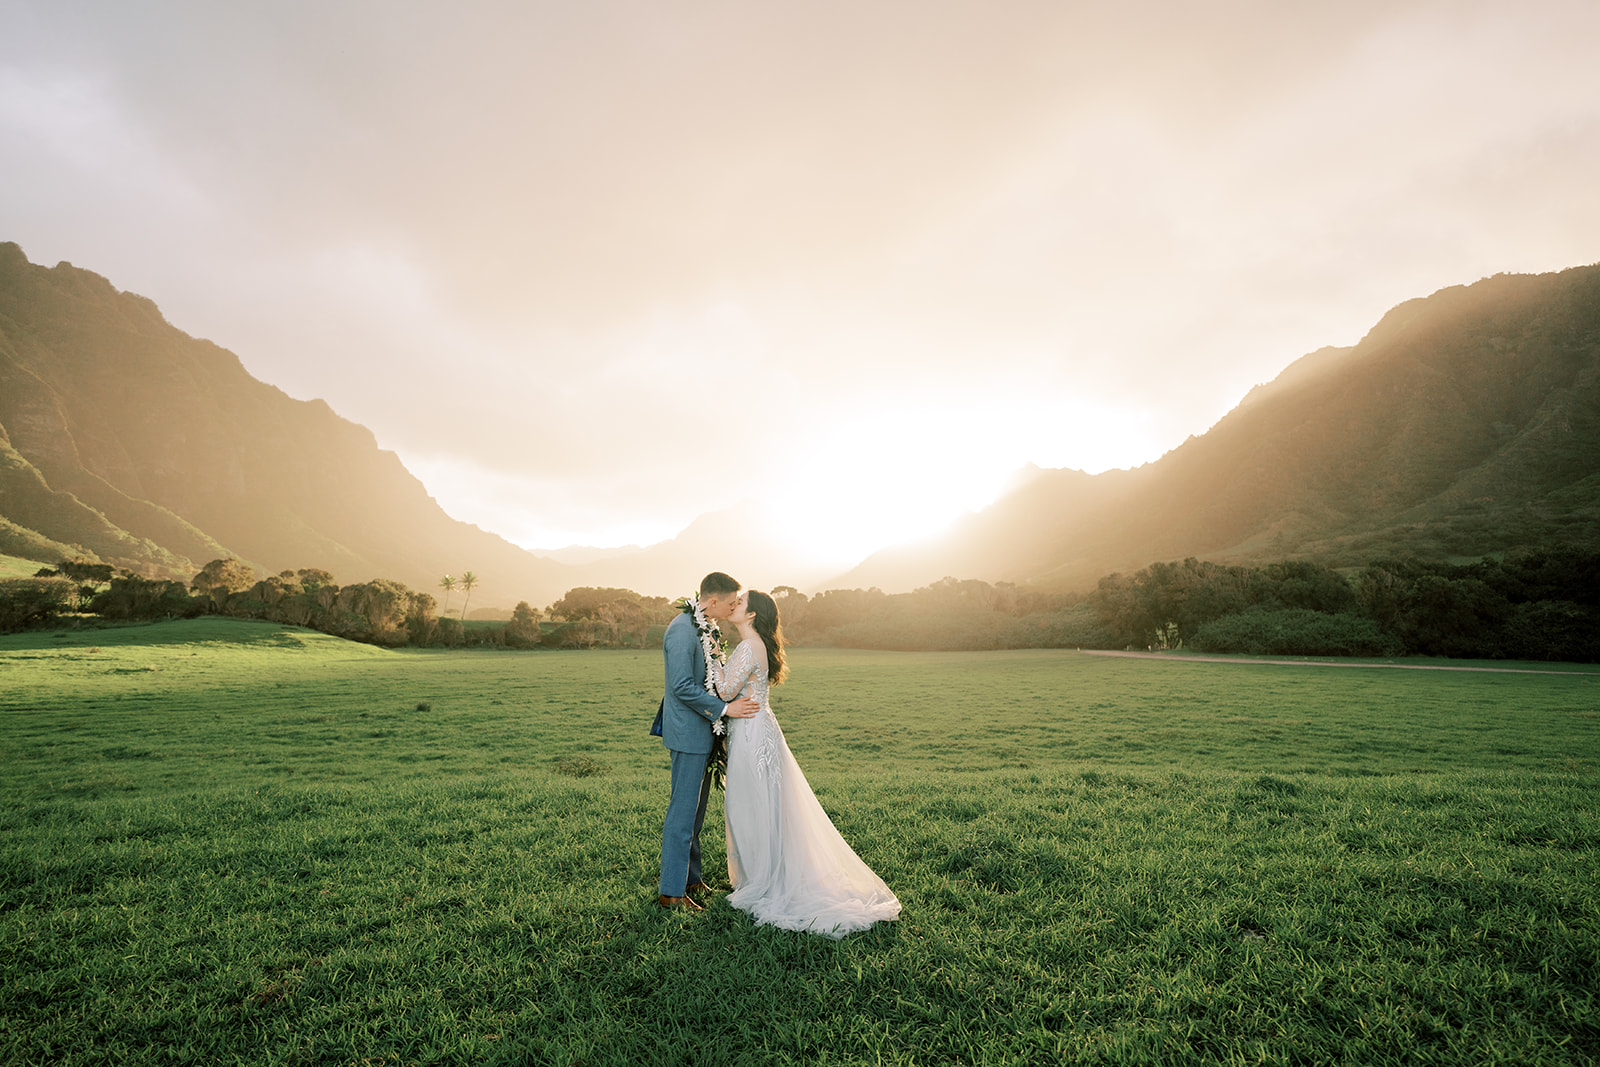 A bride and groom standing in a grassy field at sunset during their Kualoa Ranch wedding.